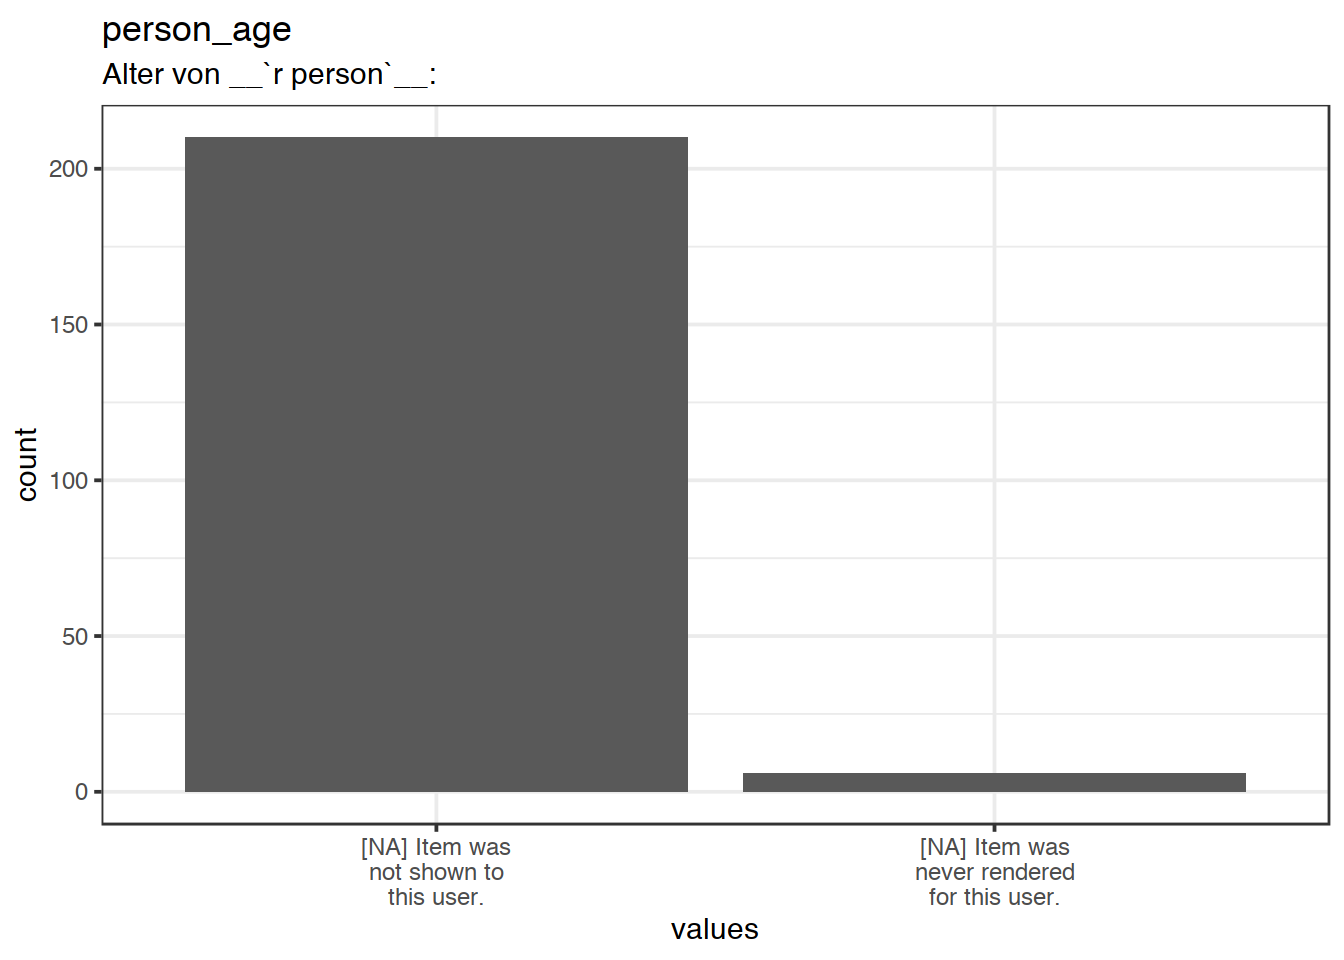 Plot of missing values for person_age